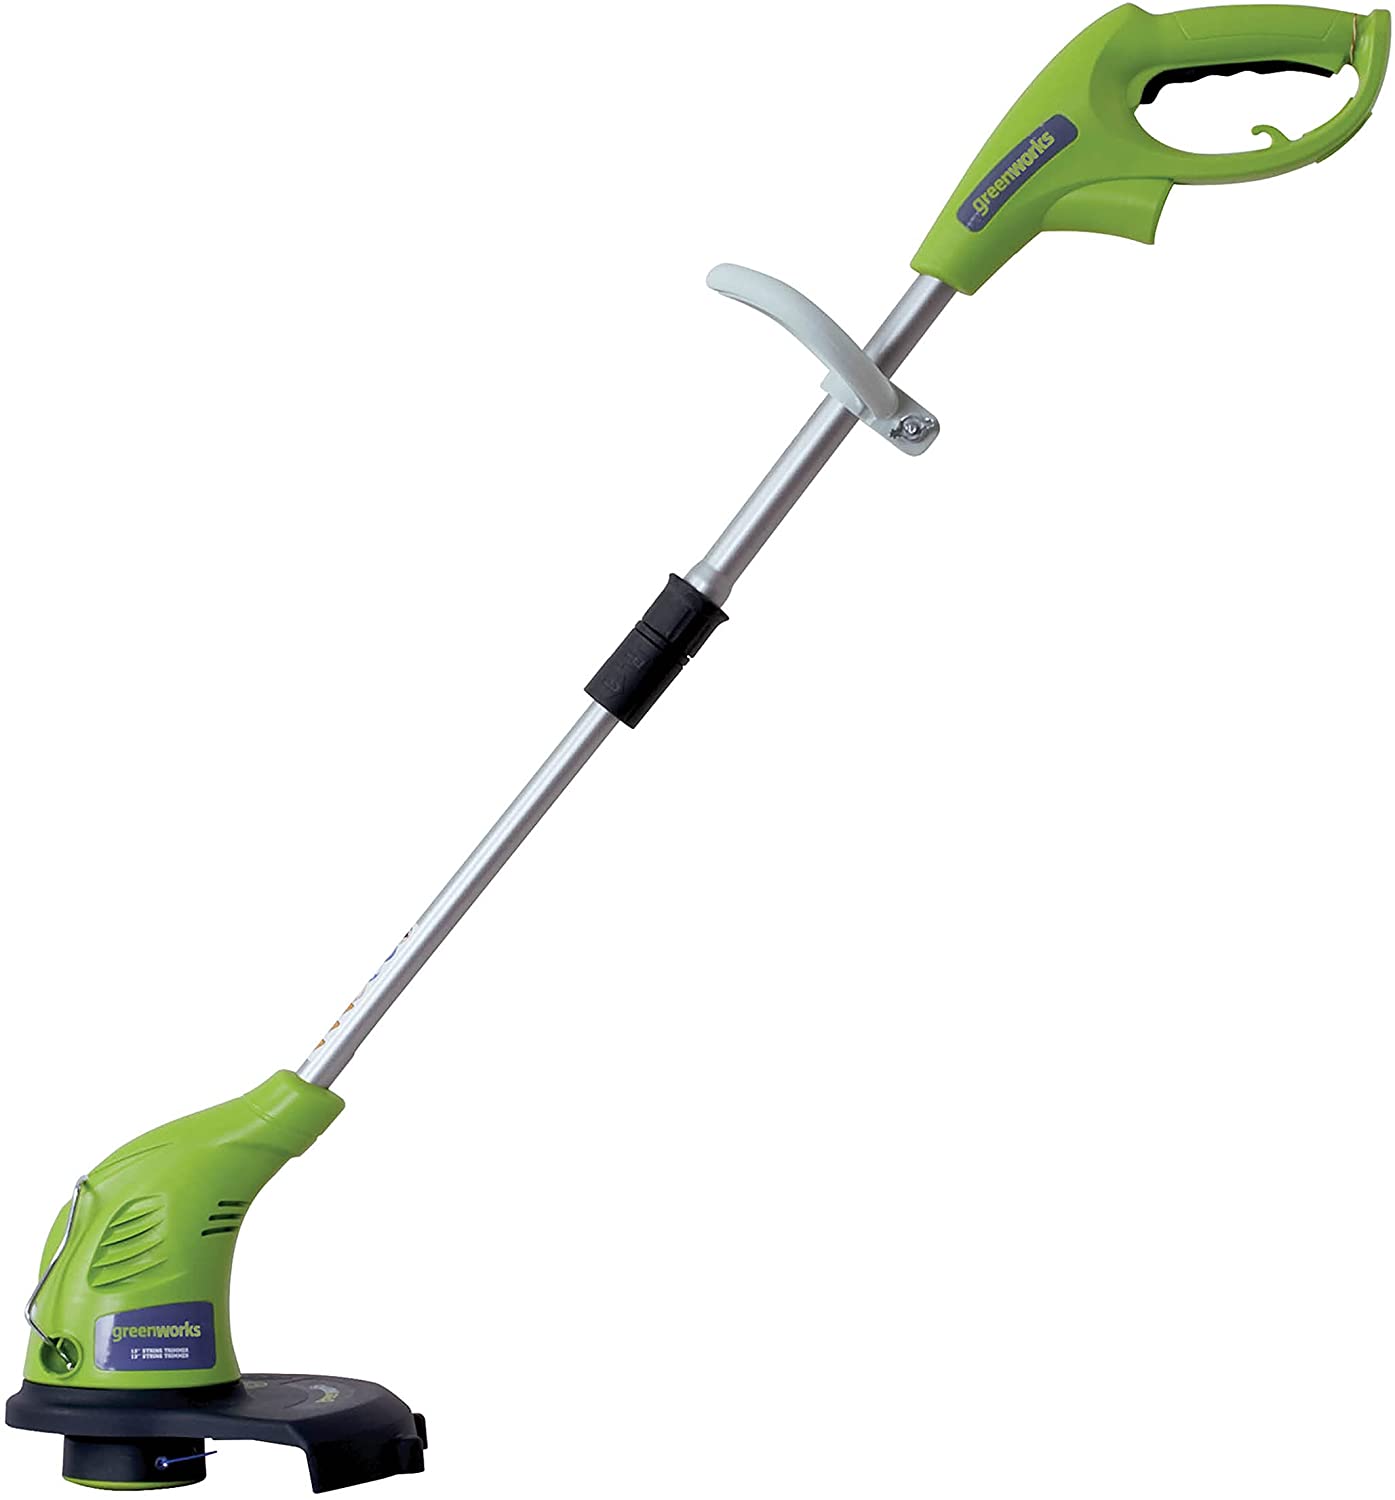 Greenworks 4 Amp 13″ Corded Electric String Trimmer – Just $37.79 at Amazon